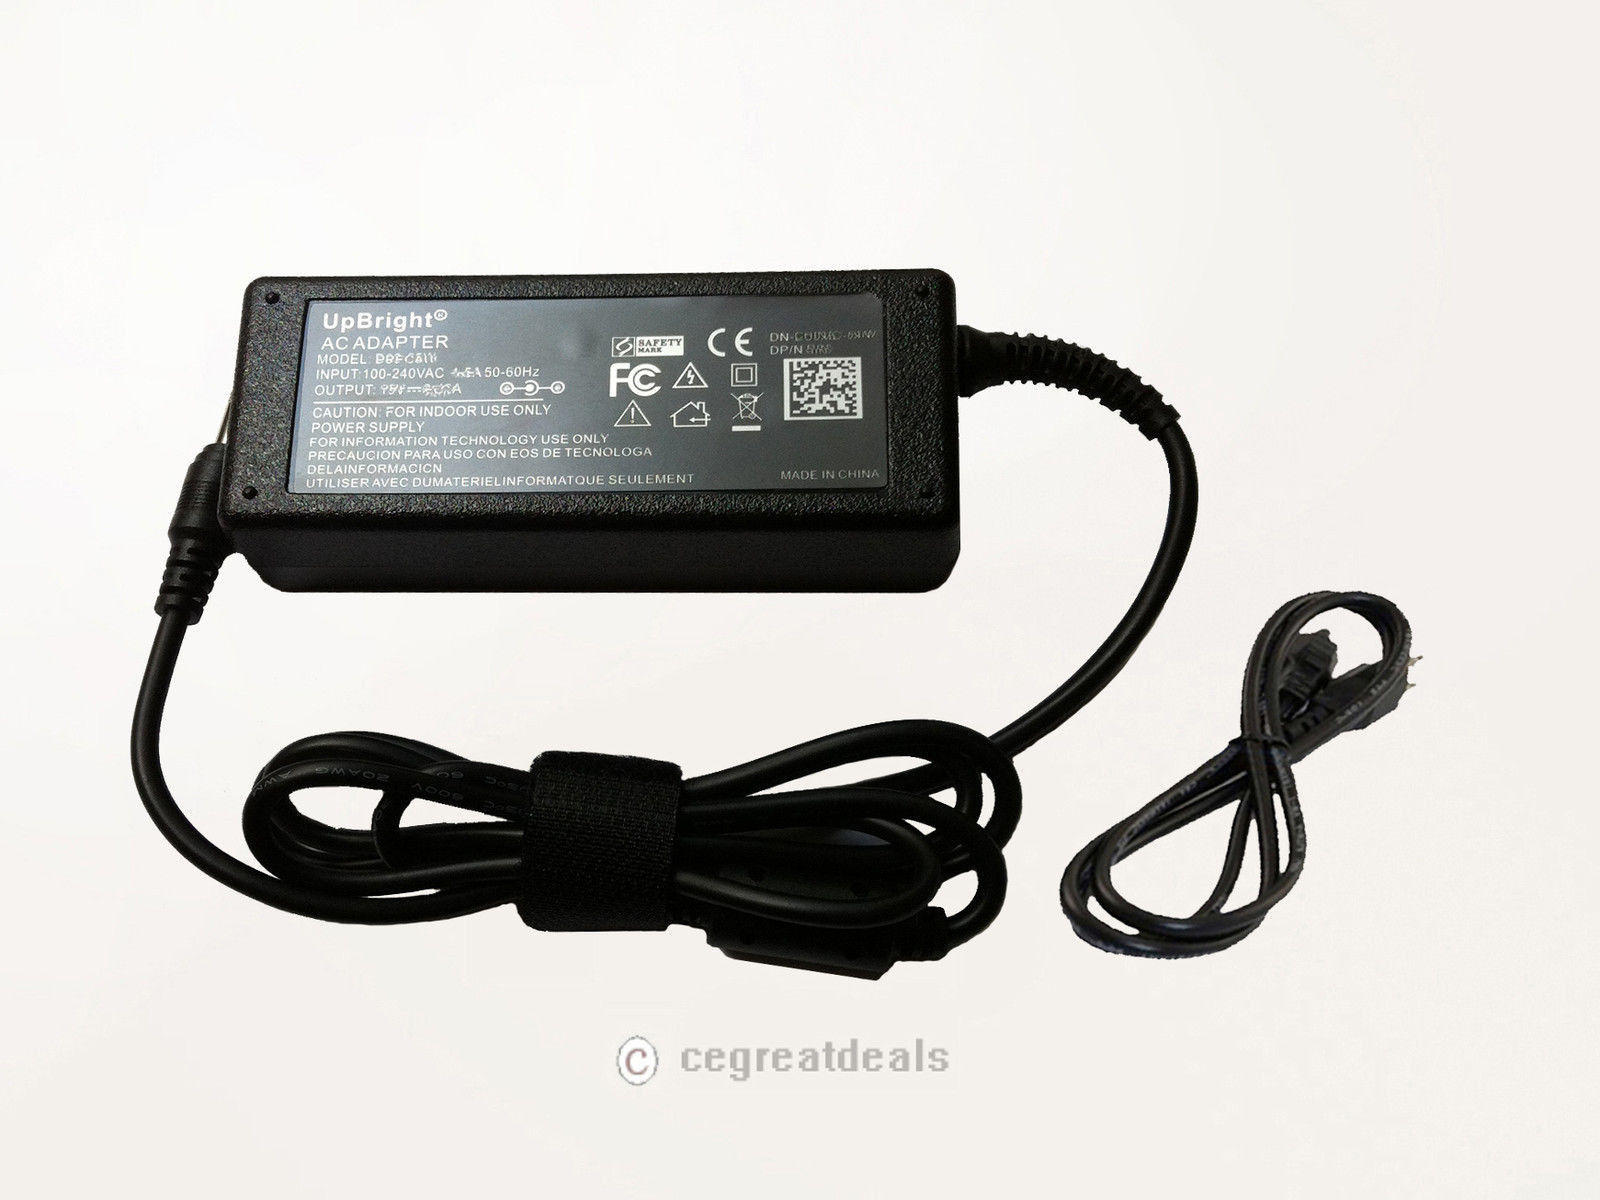 AC Adapter For Epson C32C825375 PS-11 Mobilink Printer Power Supply Cord Charger